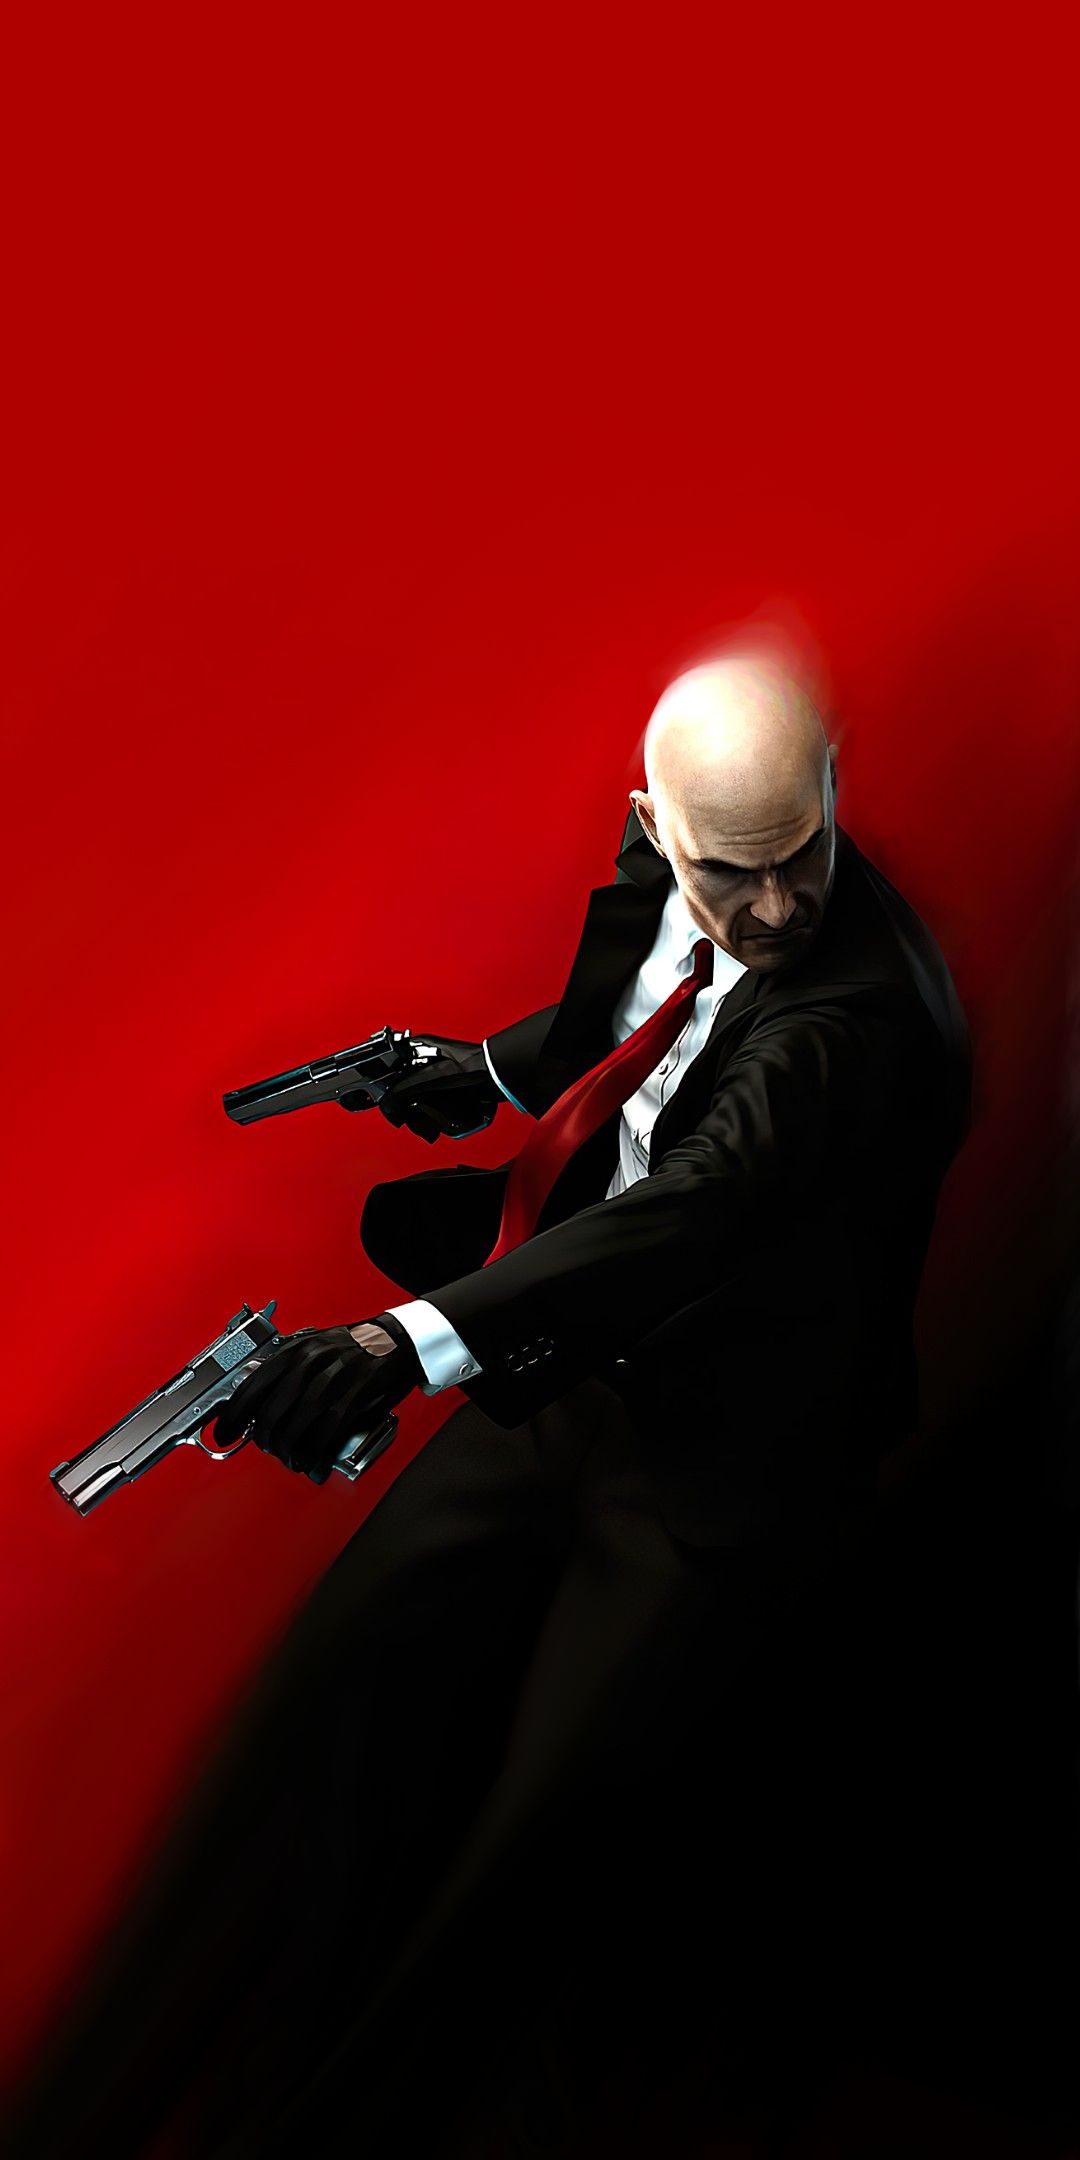  Agent 47 HQ Background Images